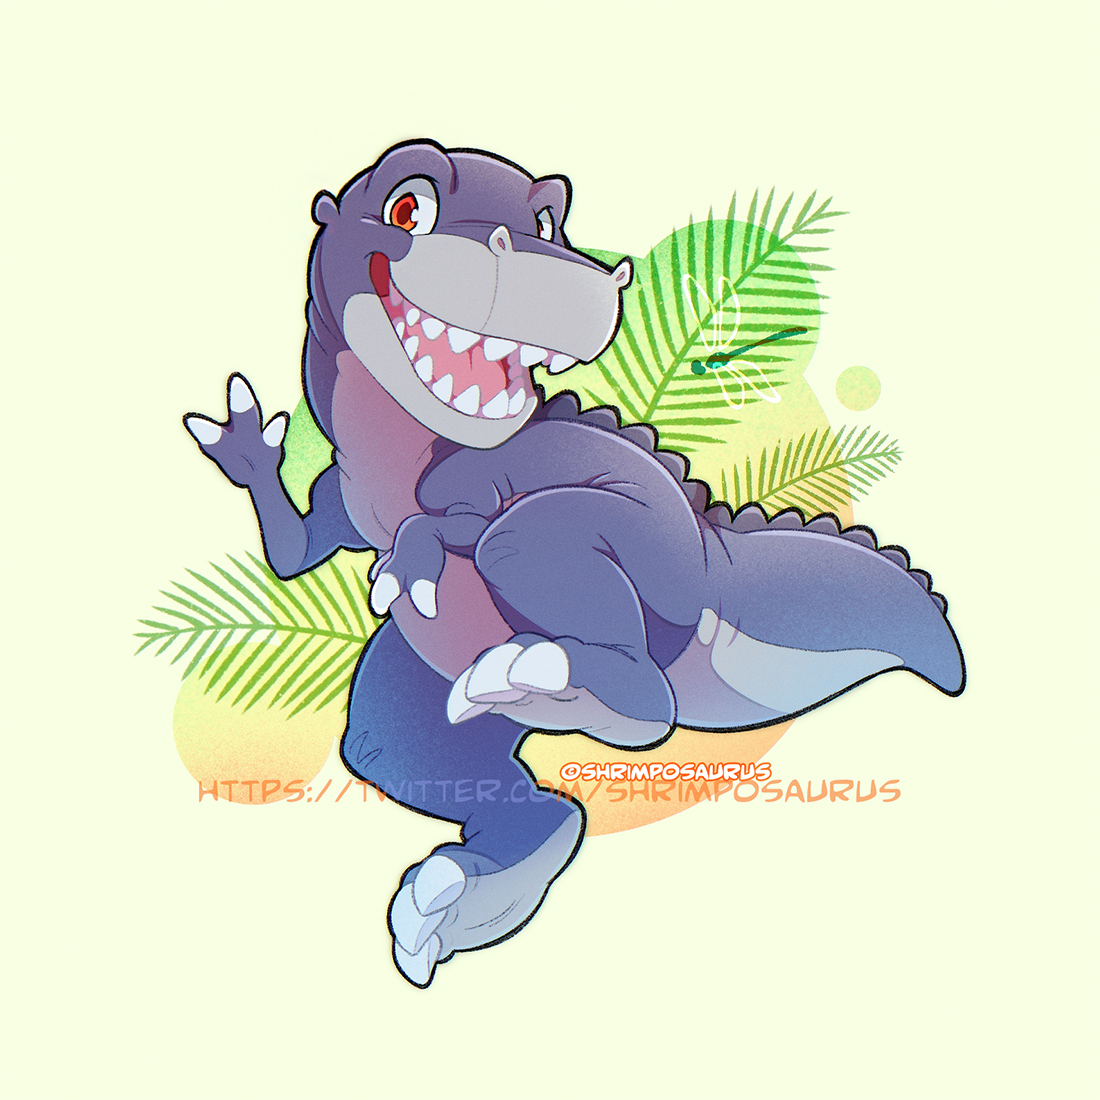 I feel so happy, I want everyone to see!🎶
Reward for outstanding @/Okapi540 on instagram. An excuse to draw Chomper, what a happy day! Thank you again🦖
#thelandbeforetime #tlbt